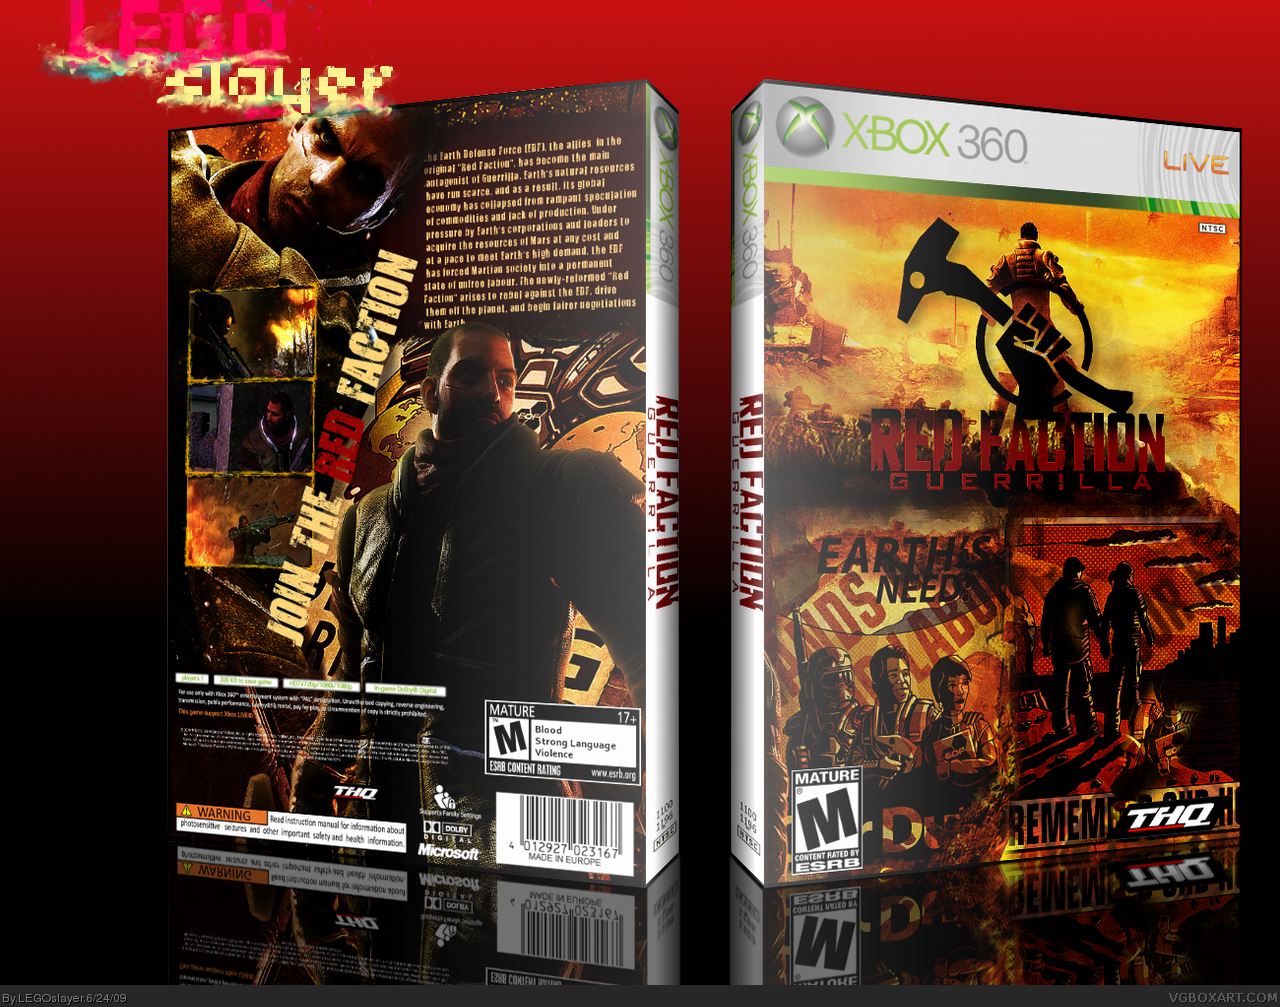 Red Faction Guerrilla box cover